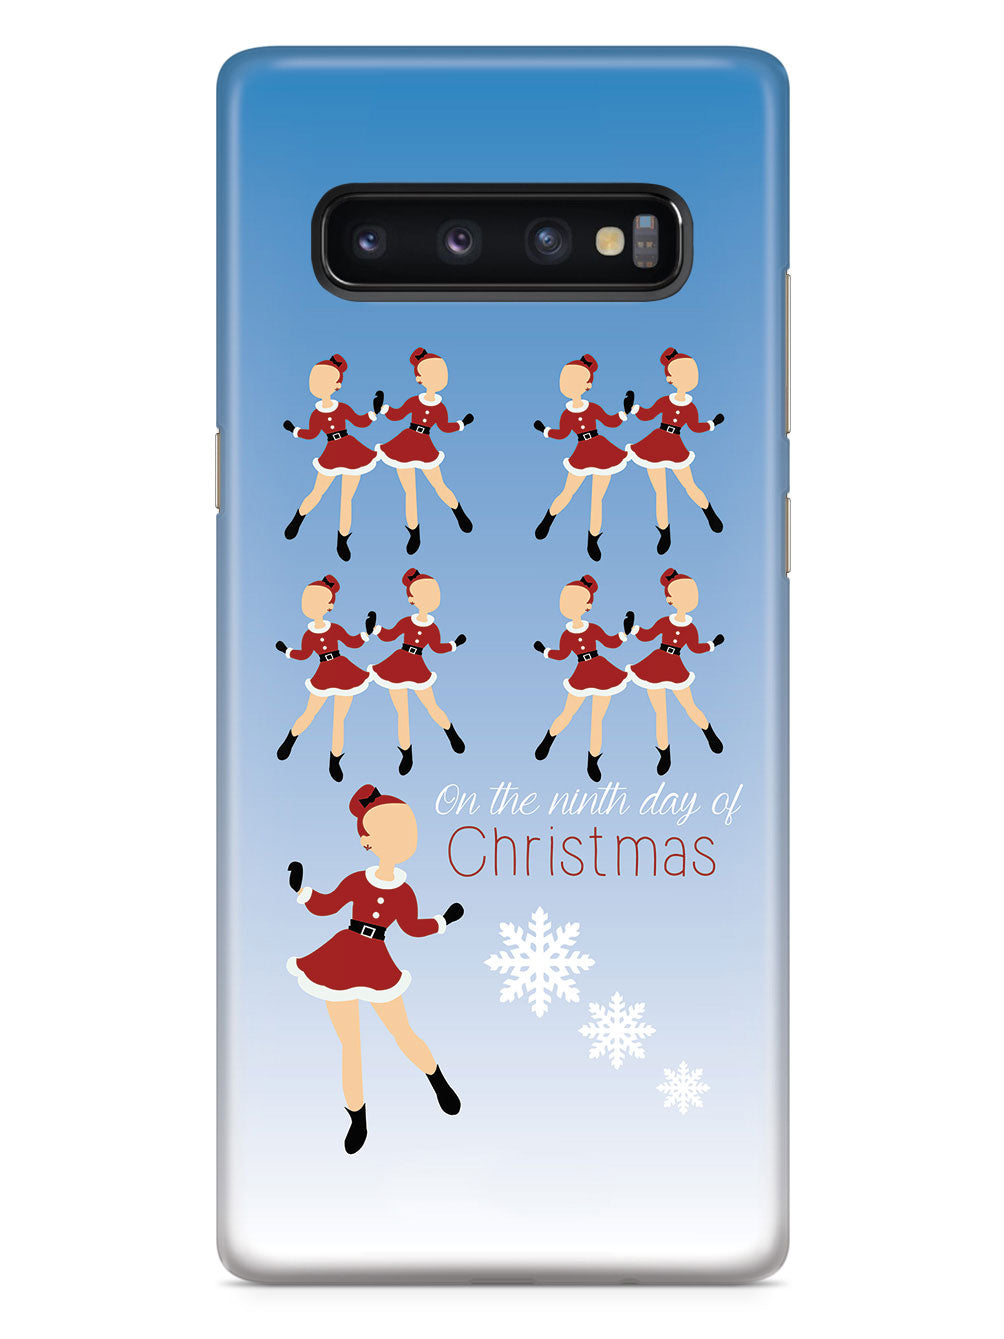 On the Ninth Day of Christmas - 9 Ladies Dancing Case